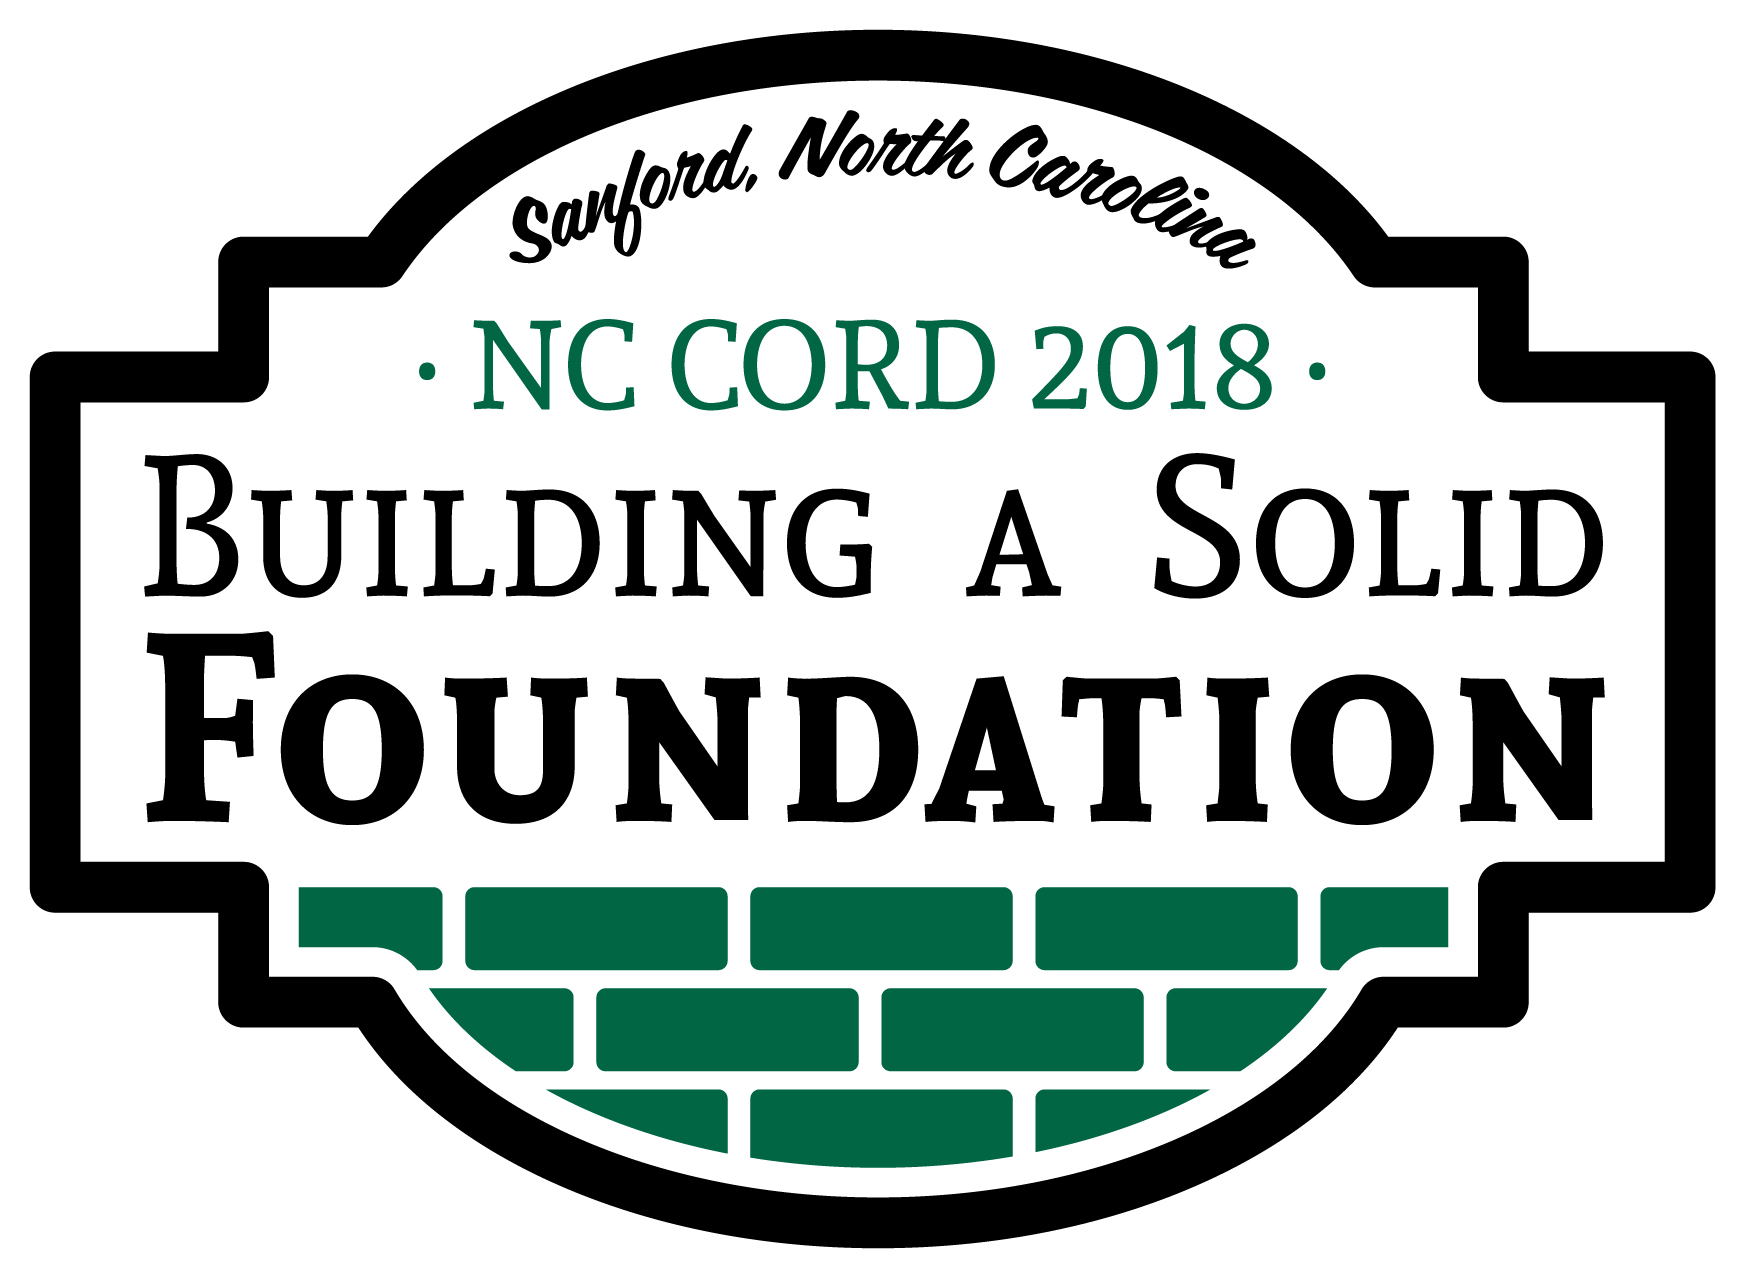 NC CORD 2018 Conference: Building A Solid Foundation in Sanford, NC